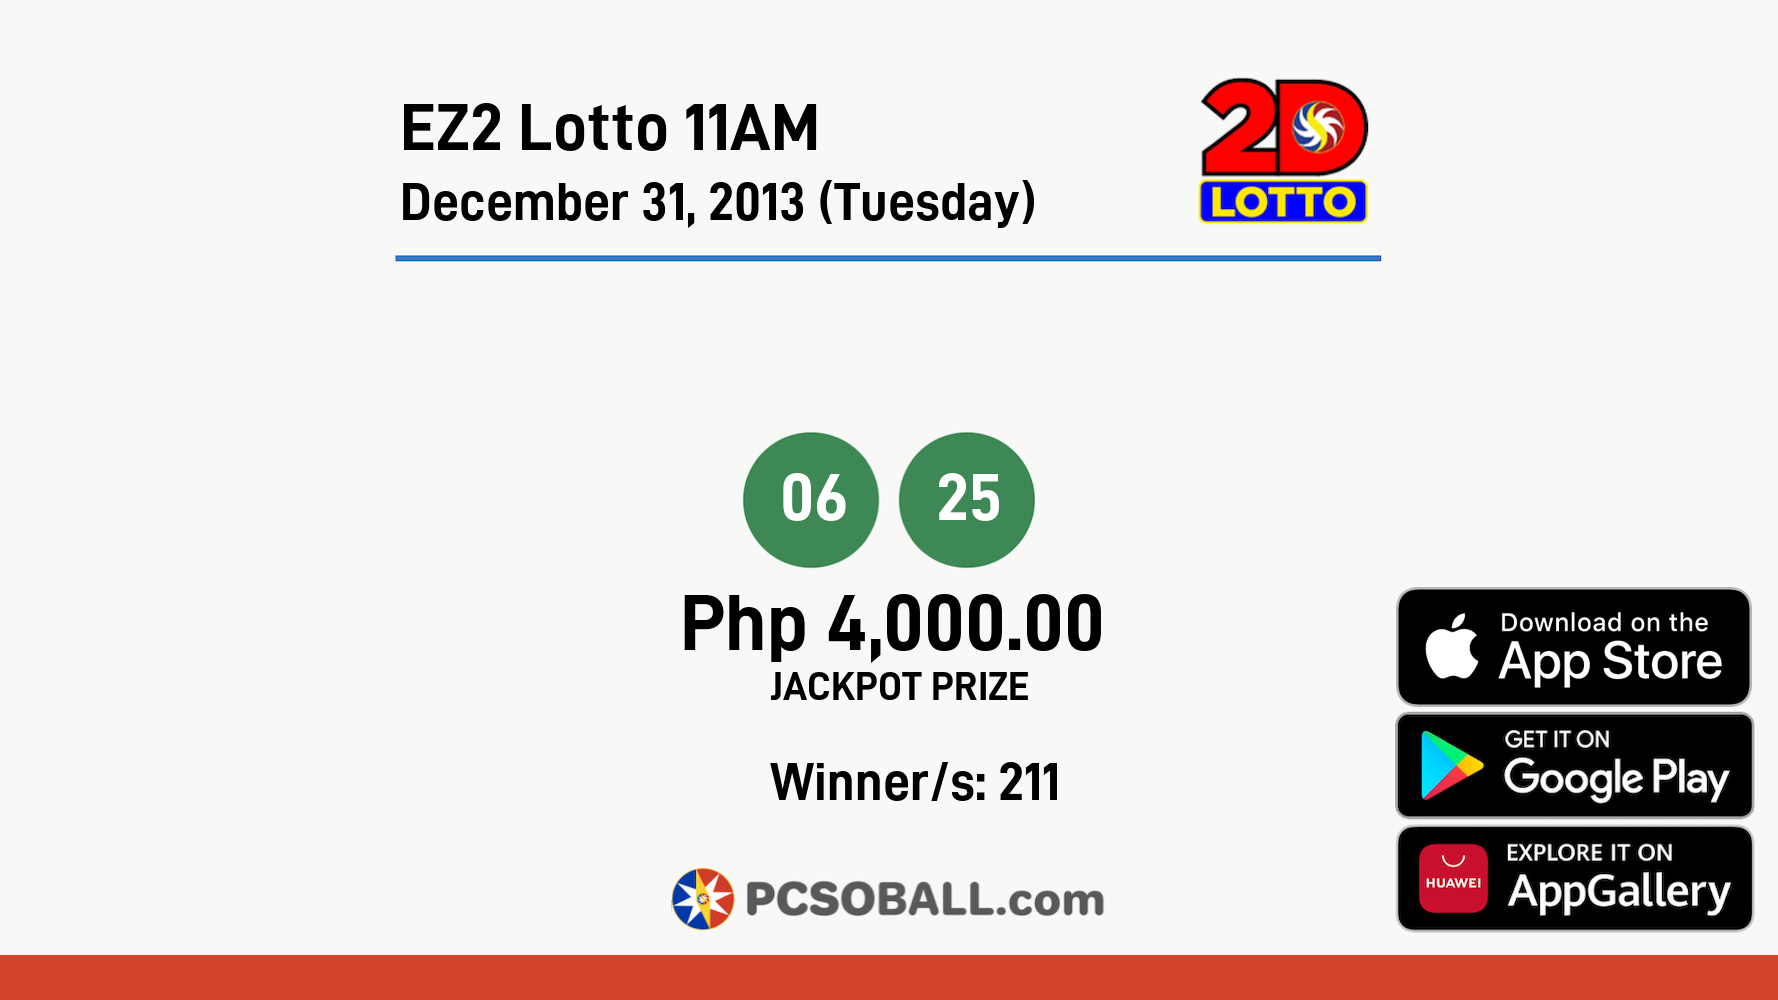 EZ2 Lotto 11AM December 31, 2013 (Tuesday) Result